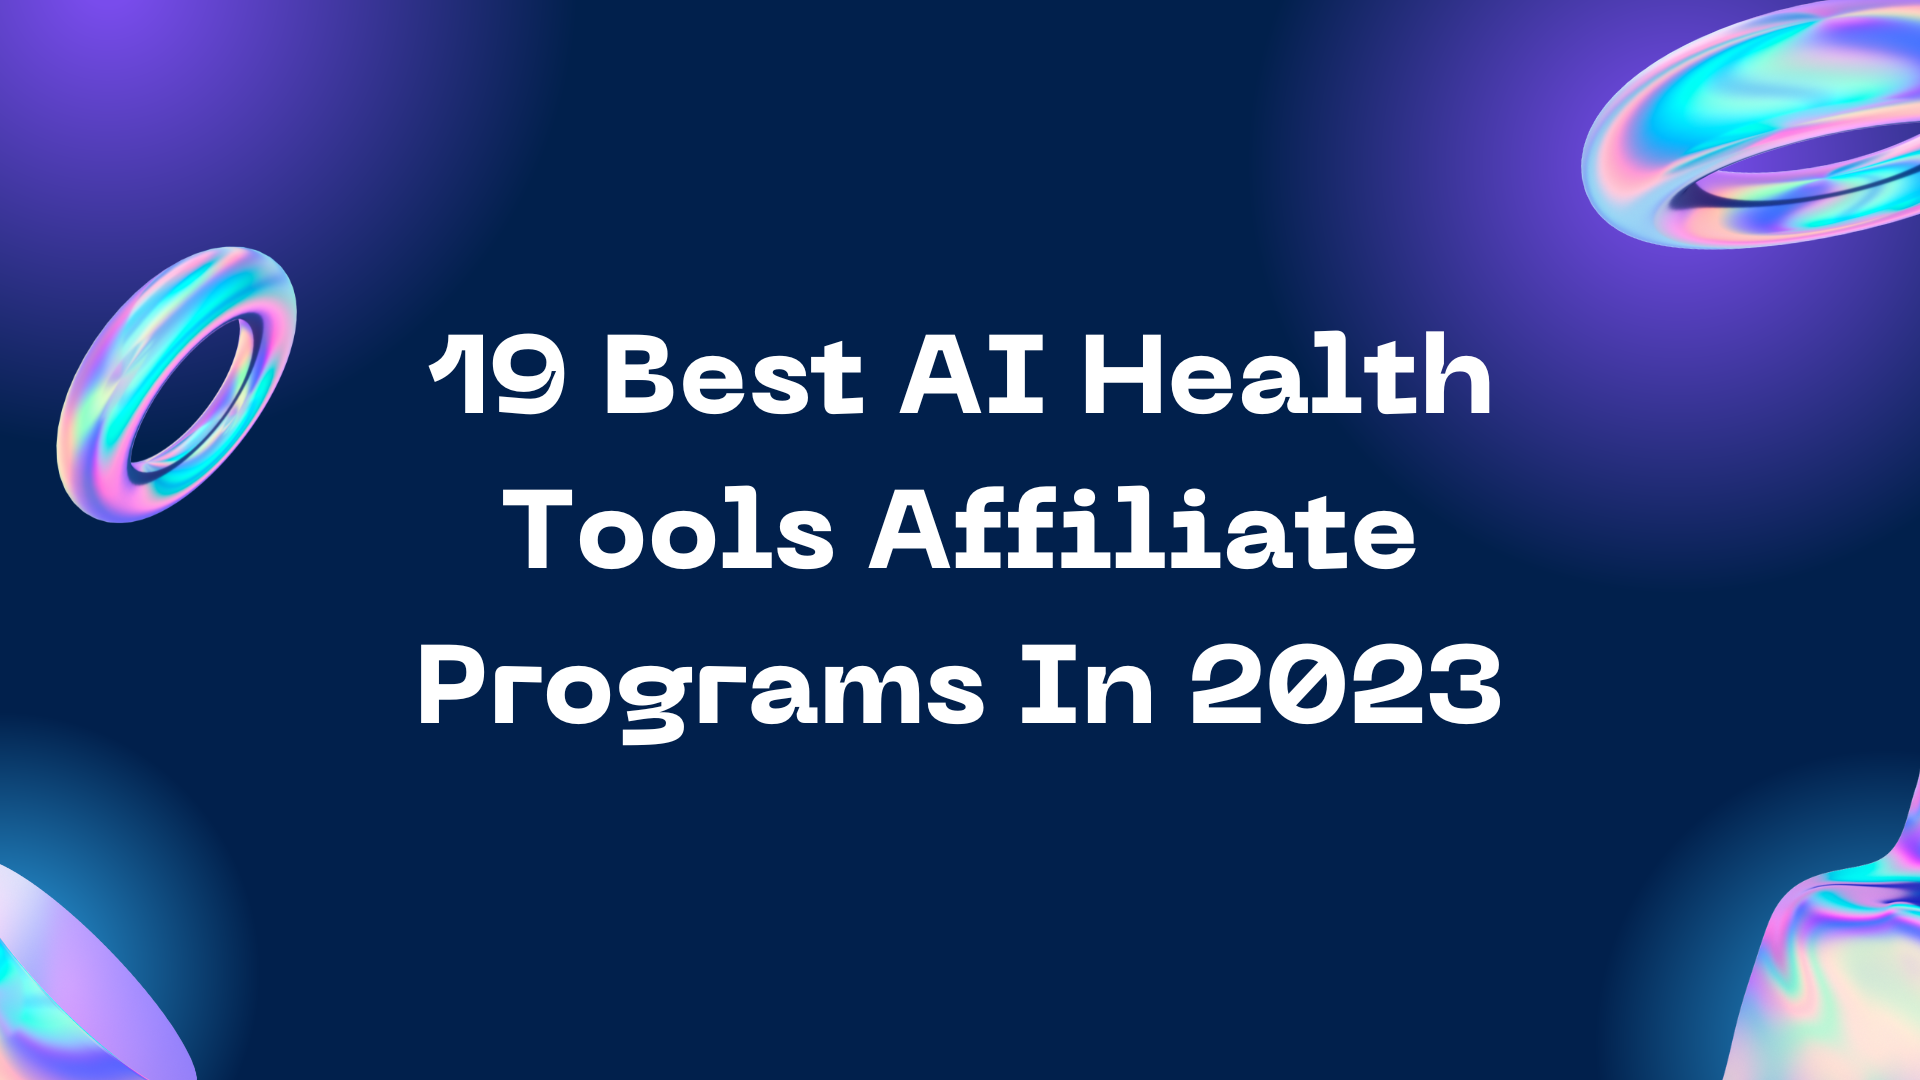 19 Best AI Health Tools Affiliate Programs In 2023